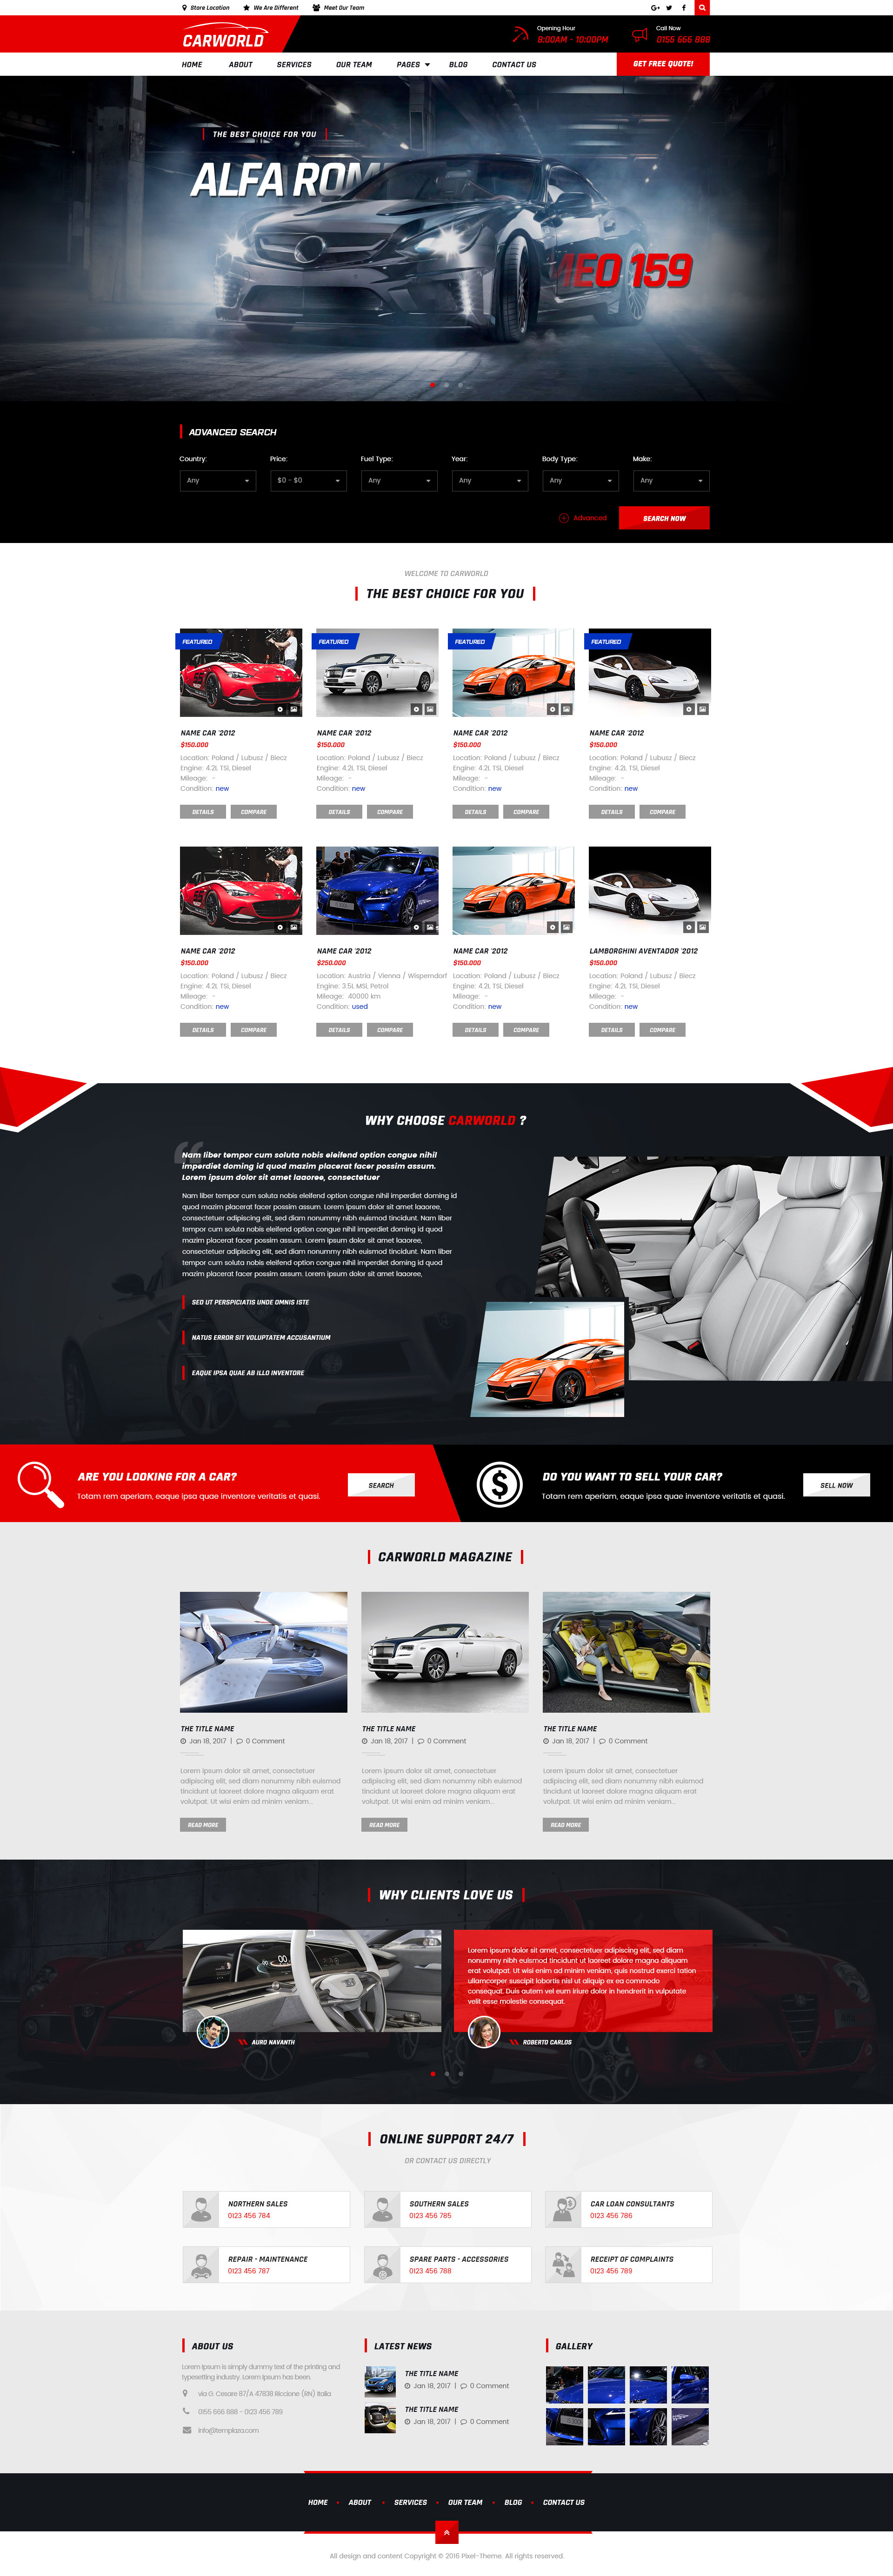 car-service-website-template-free-download-for-your-needs